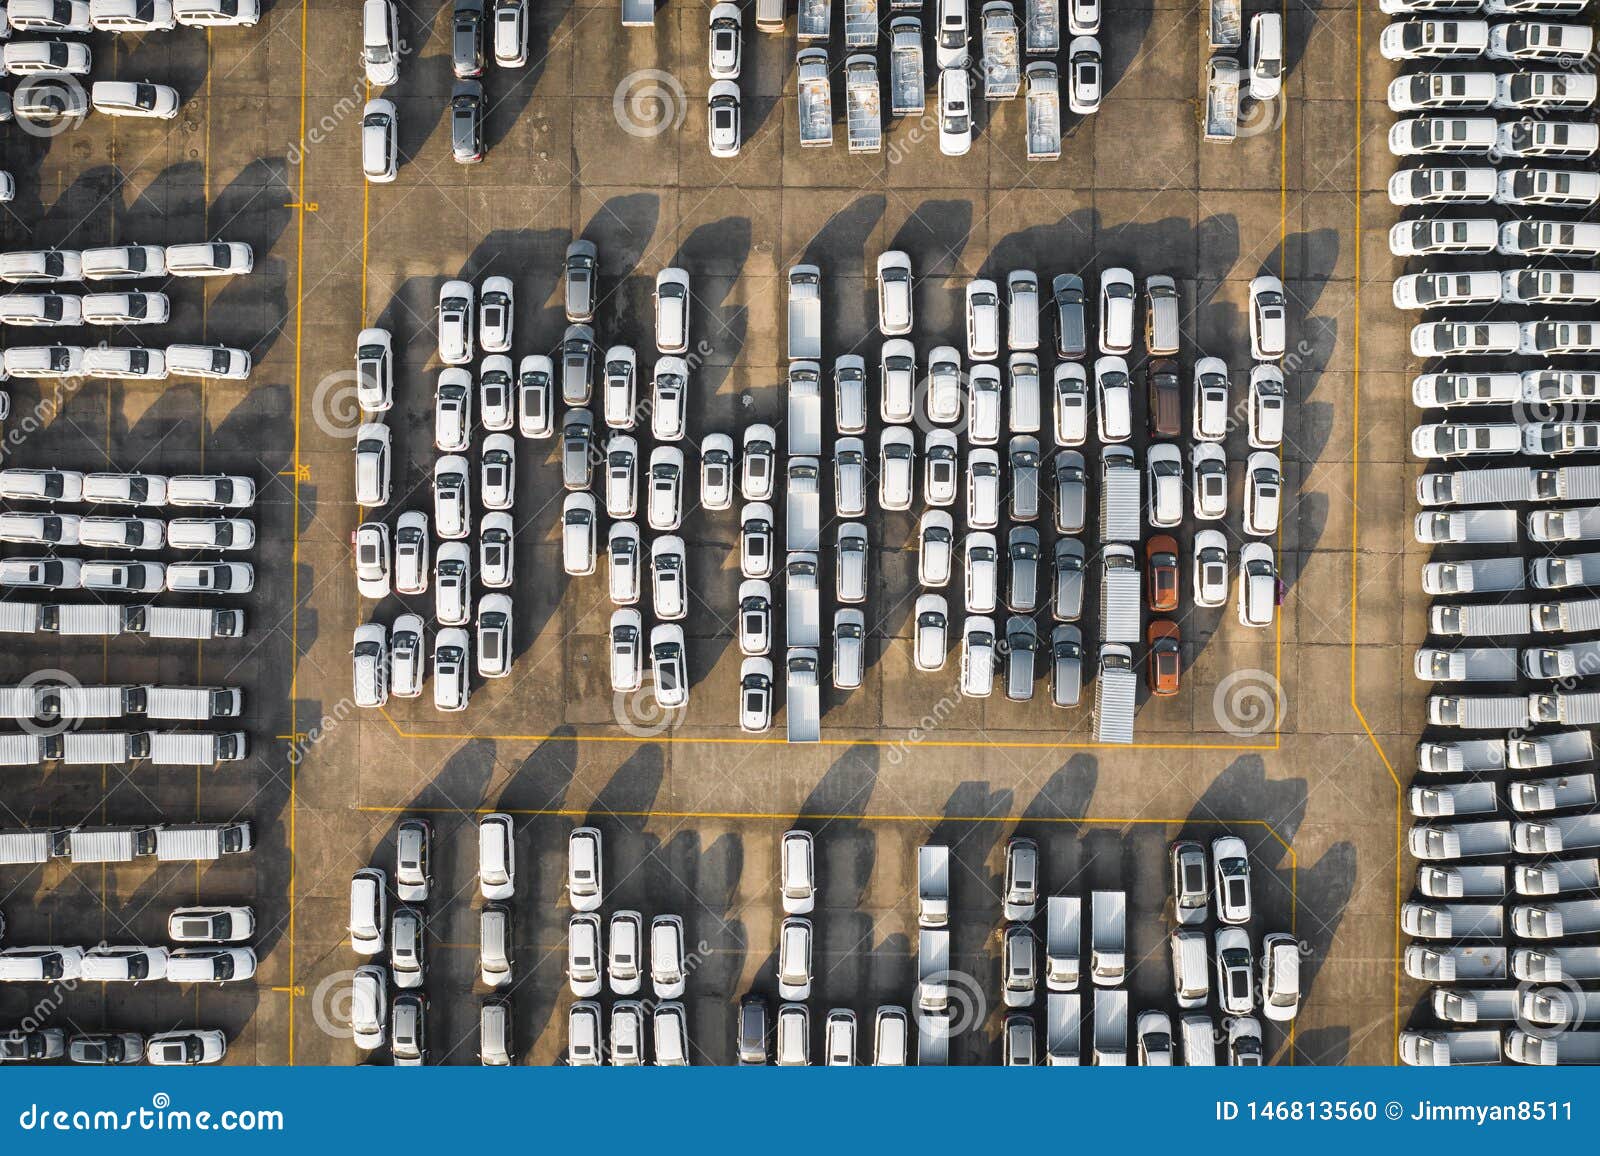  Cars  warehouse  stock photo Image of business 